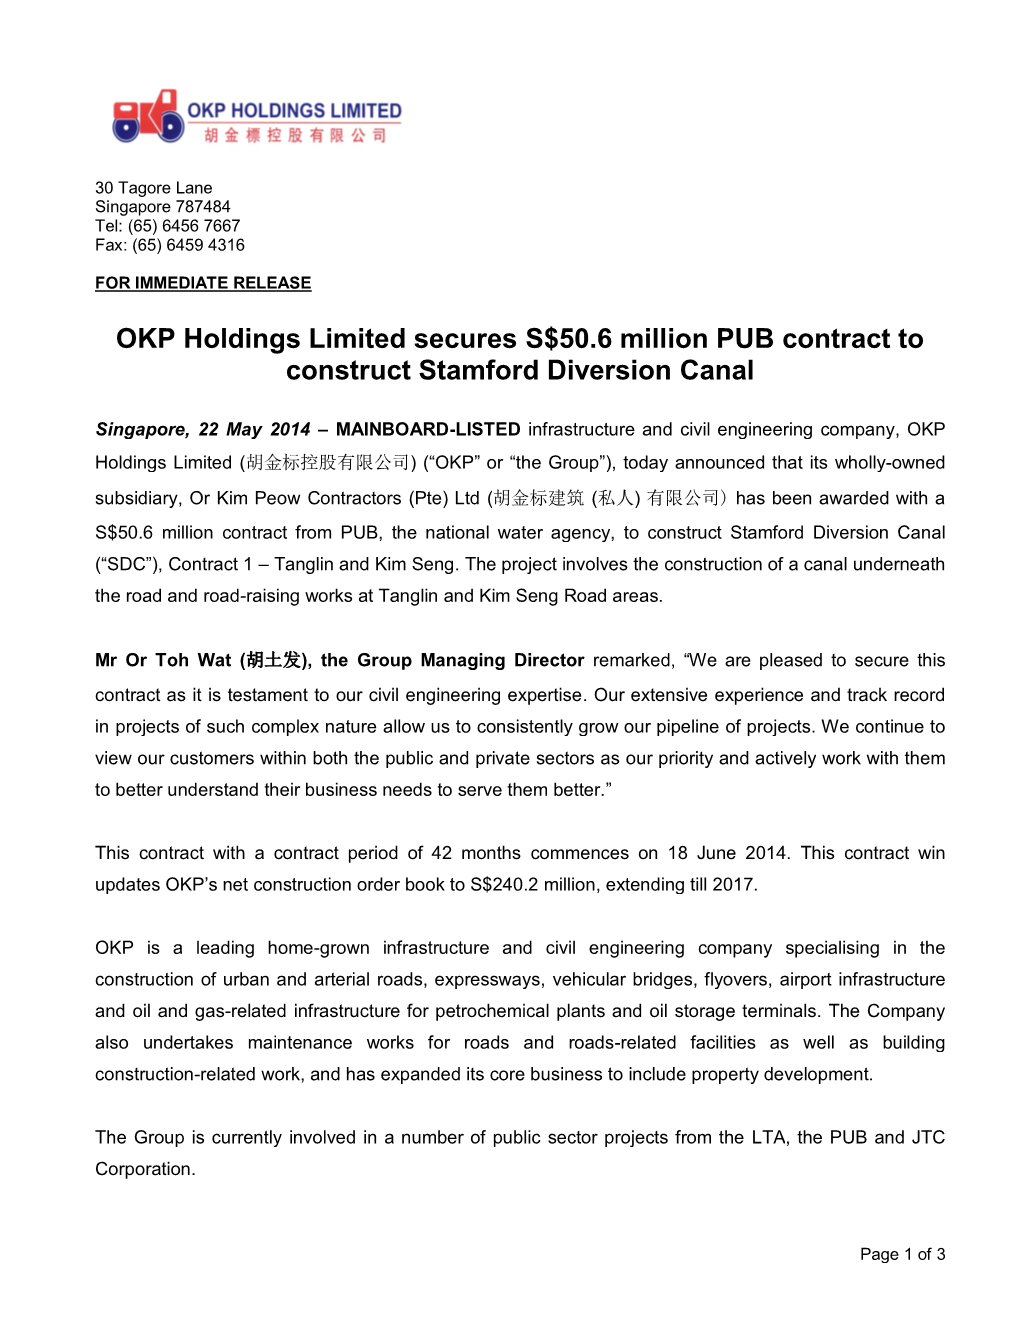 OKP Holdings Limited Secures S$50.6 Million PUB Contract to Construct Stamford Diversion Canal